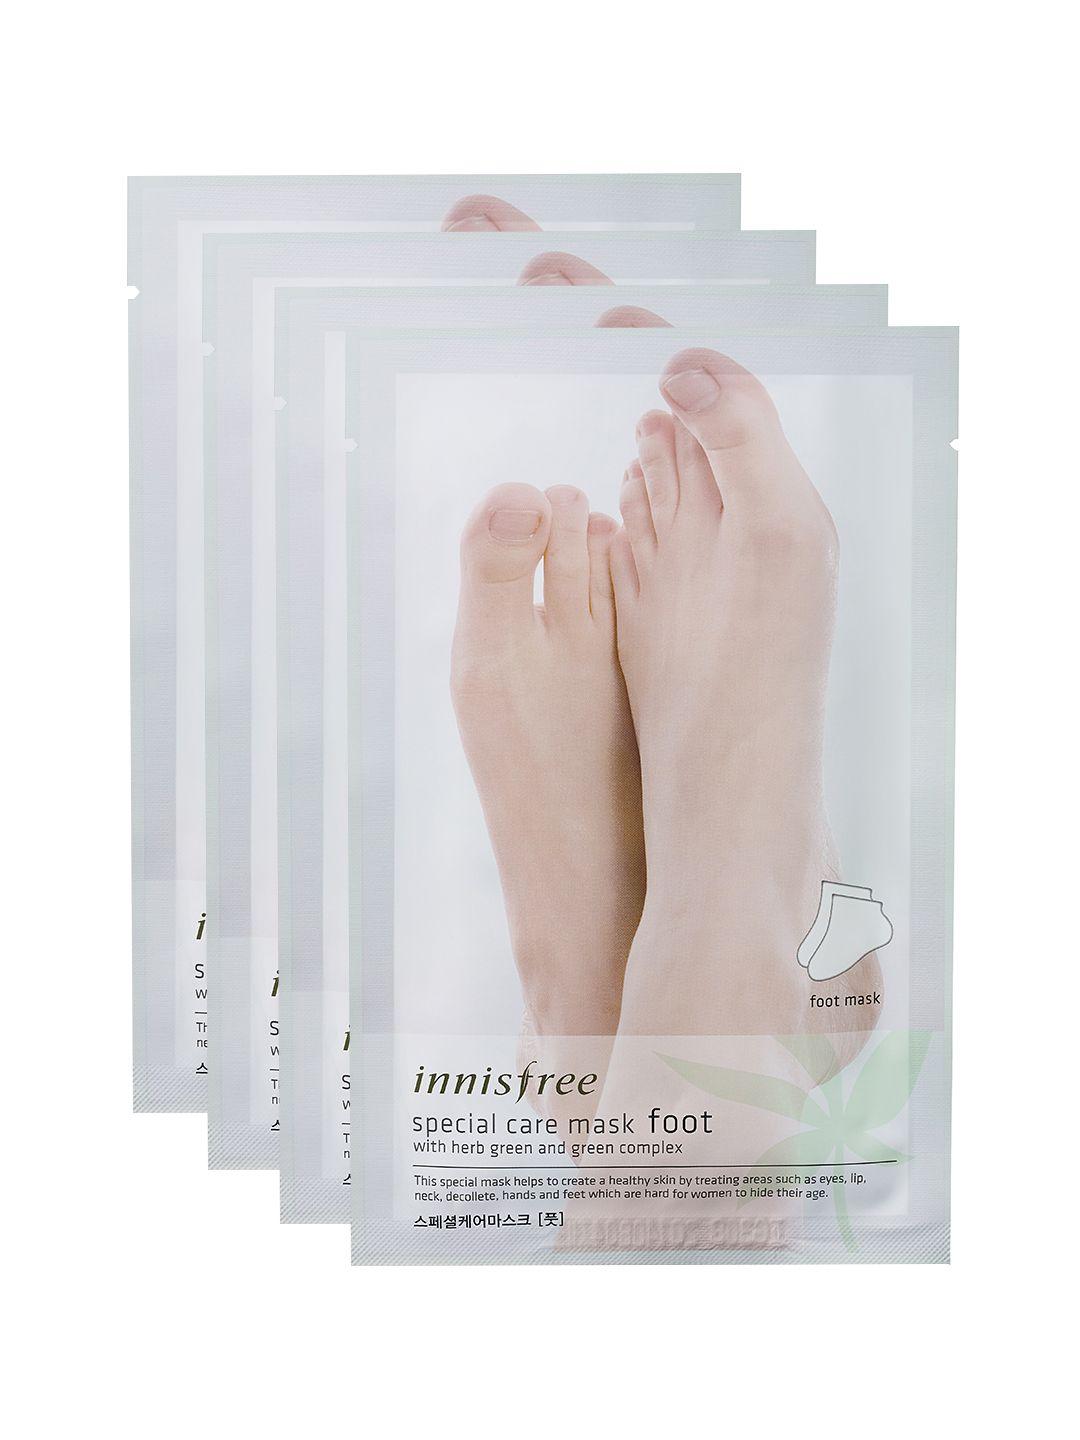 innisfree-set-of-4-special-care-foot-mask-with-herb-green-&-green-complex---20-ml-each